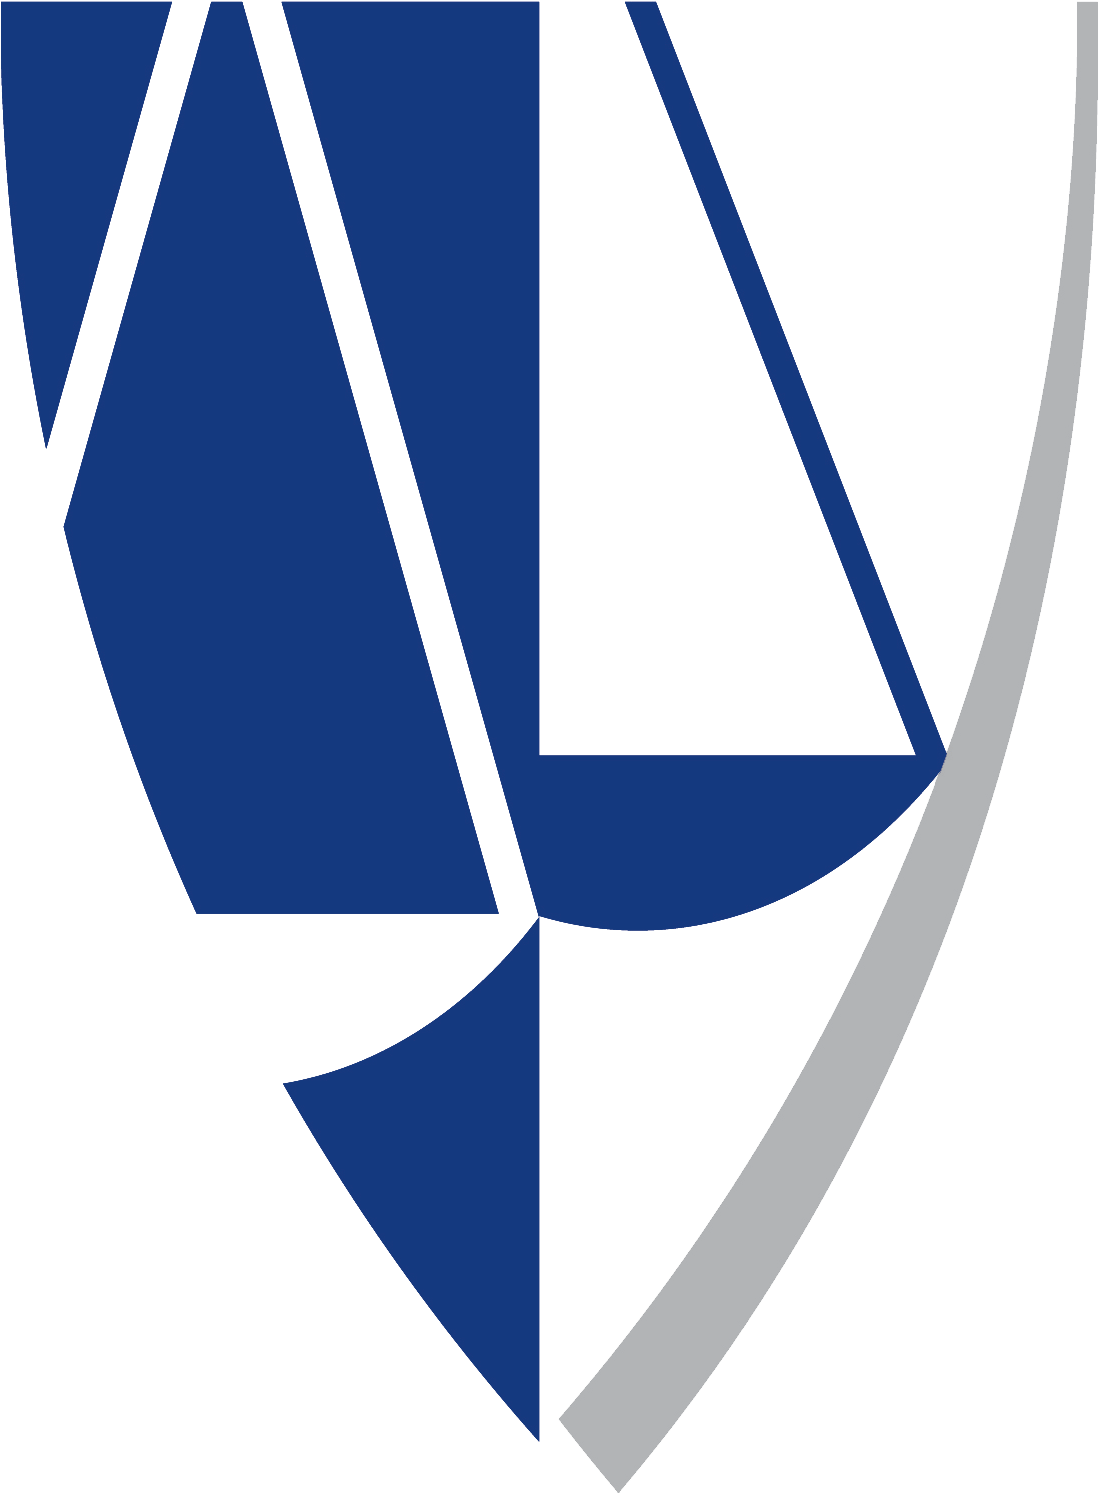 File:UF Levin Law logo.png - Wikipedia